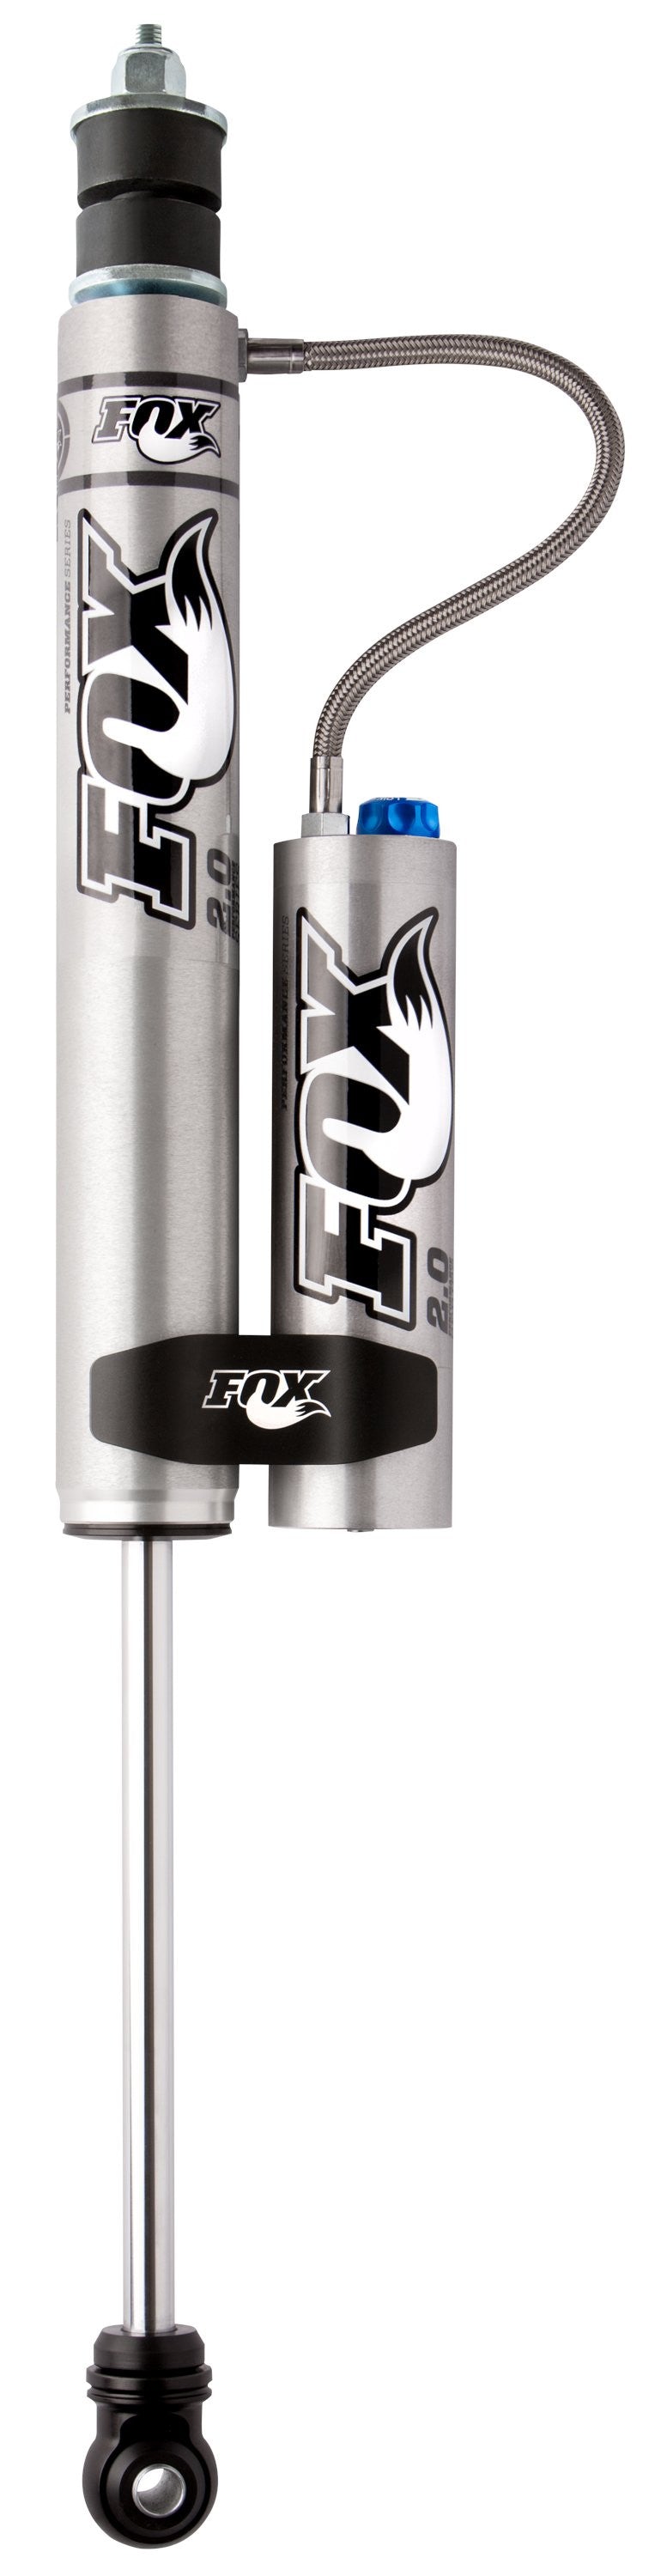 PERFORMANCE SERIES 2.0 SMOOTH BODY RESERVOIR SHOCK - ADJUSTABLE Lift: 1-3 2005-2016 Ford F-350 Super Duty FOX-985-26-104 - 2.0 SHOCK - FOX Offroad Shocks - Texas Complete Truck Center